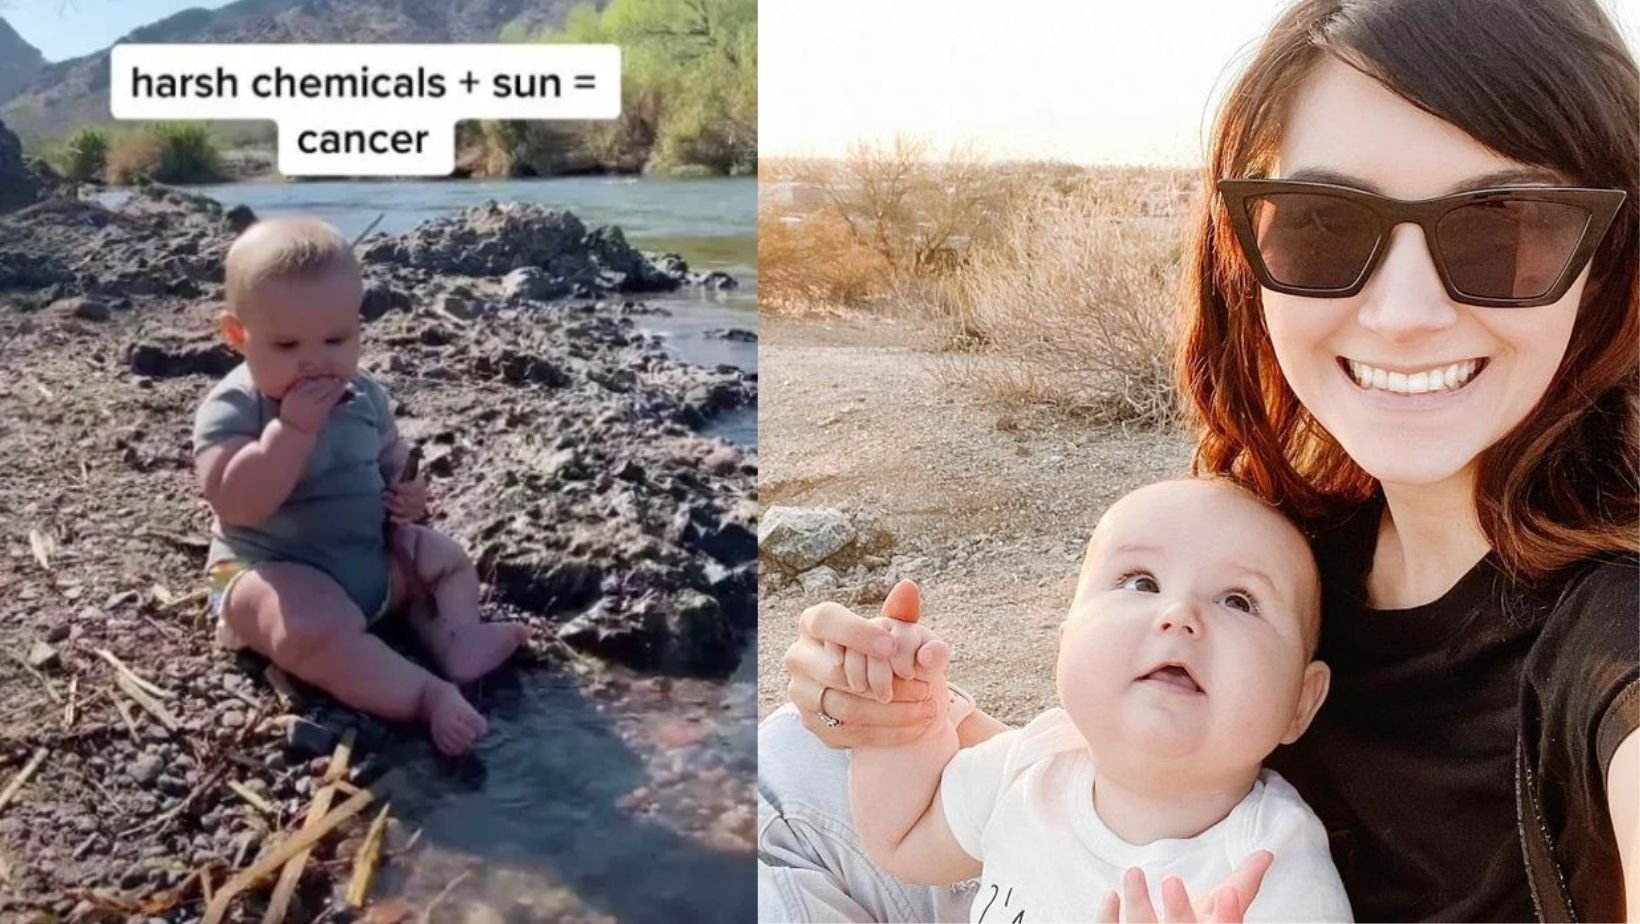 1 115.jpg?resize=1200,630 - Vegan Mom Slammed Online After Saying She Does Not Put Sun Cream On Her Baby Because Of It’s Harsh Chemicals